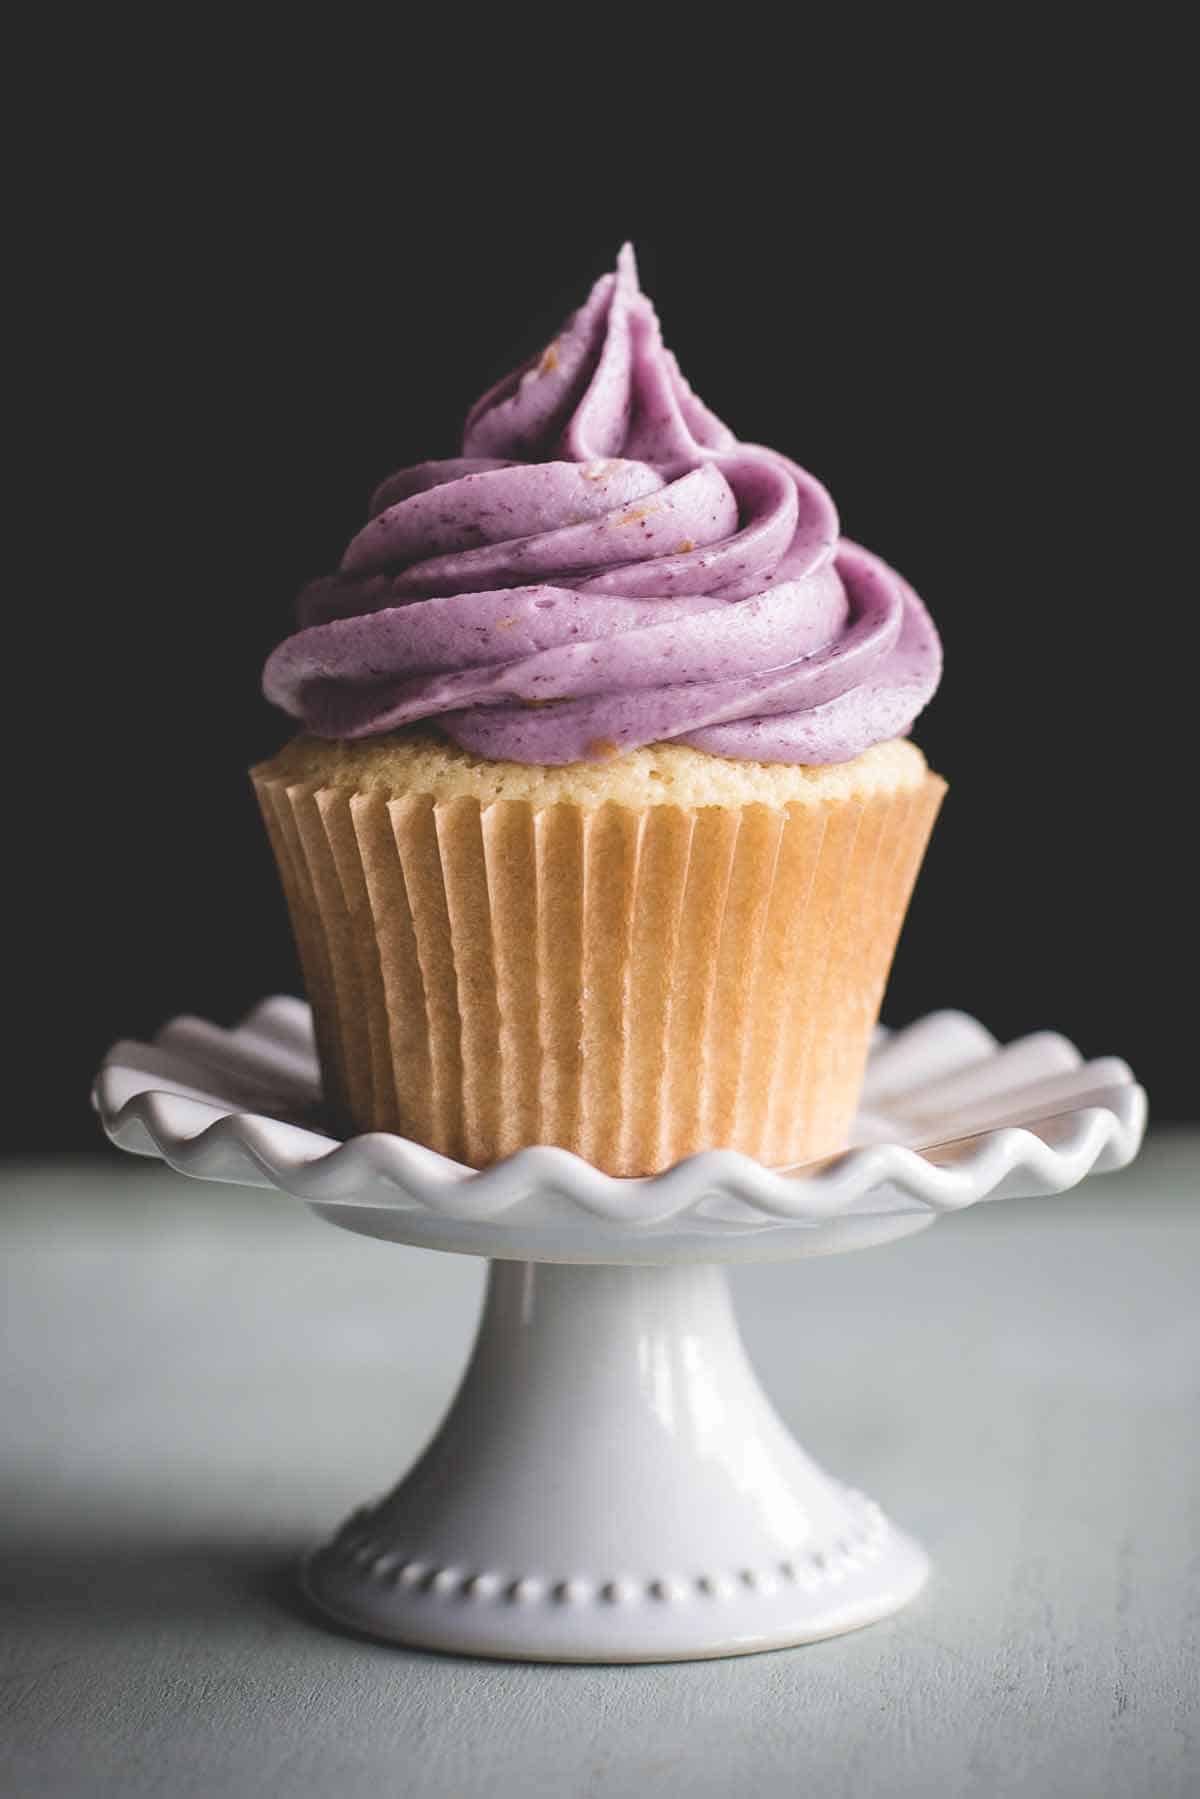 Lemon cupcake filled with blueberry filling and topped with blueberry buttercream frosting.